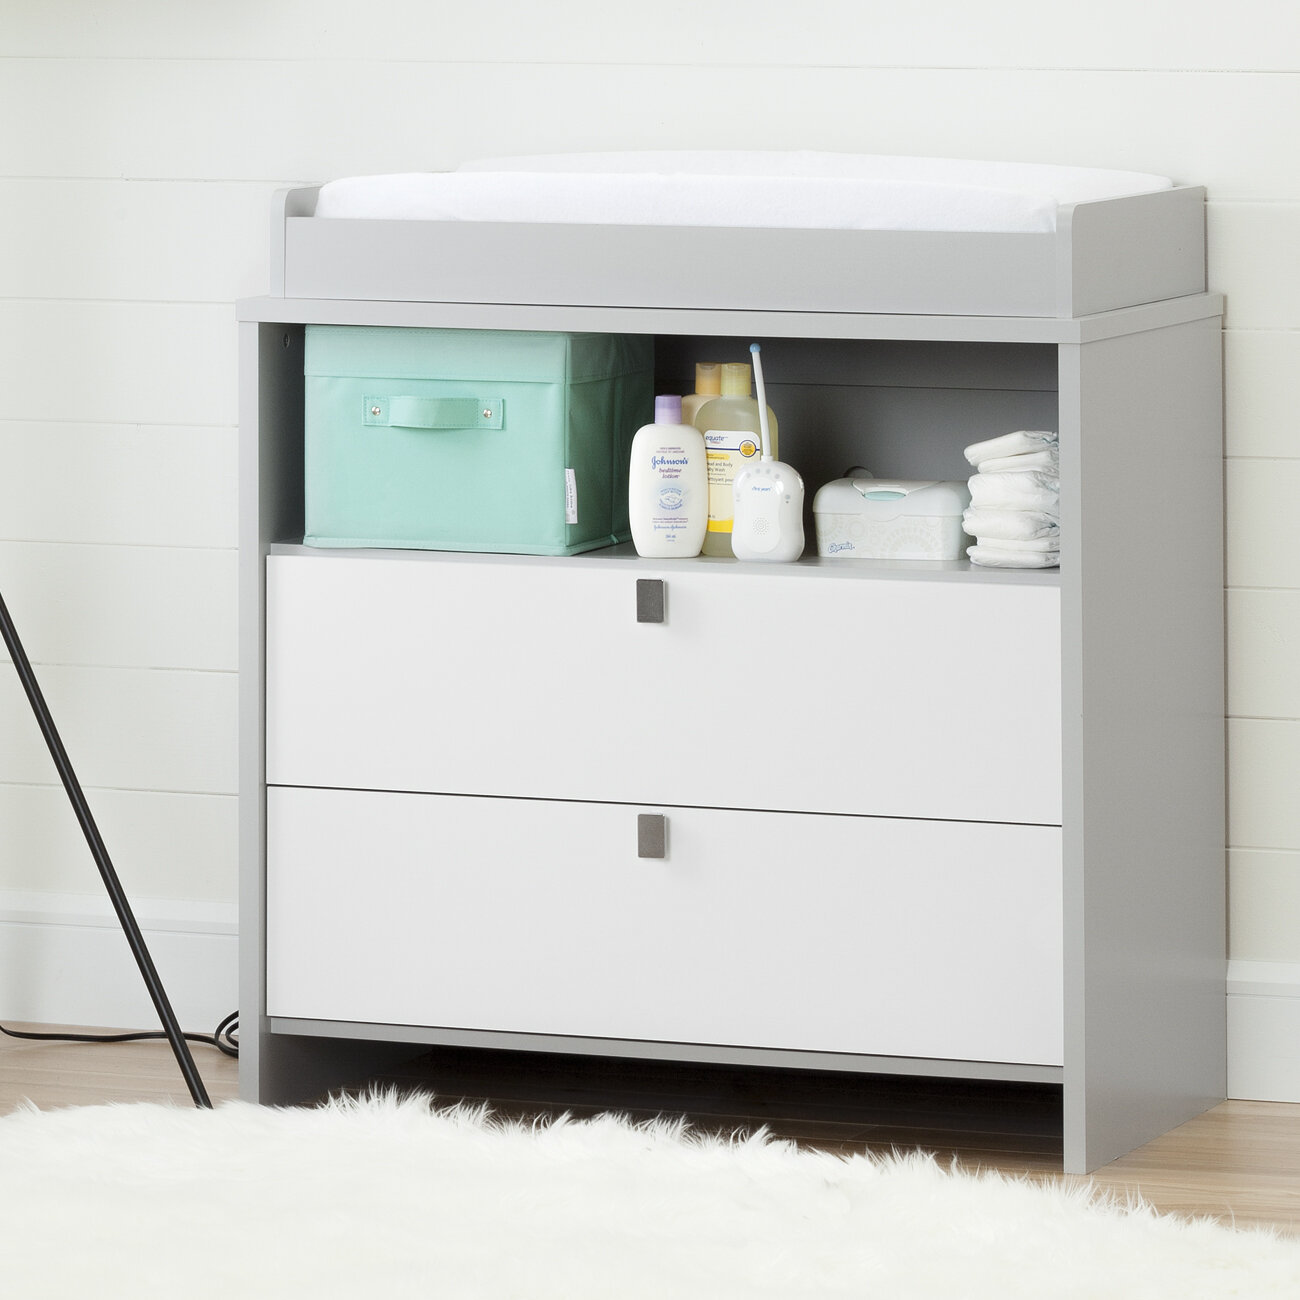 South Shore Cookie Changing Table Dresser Reviews Wayfair